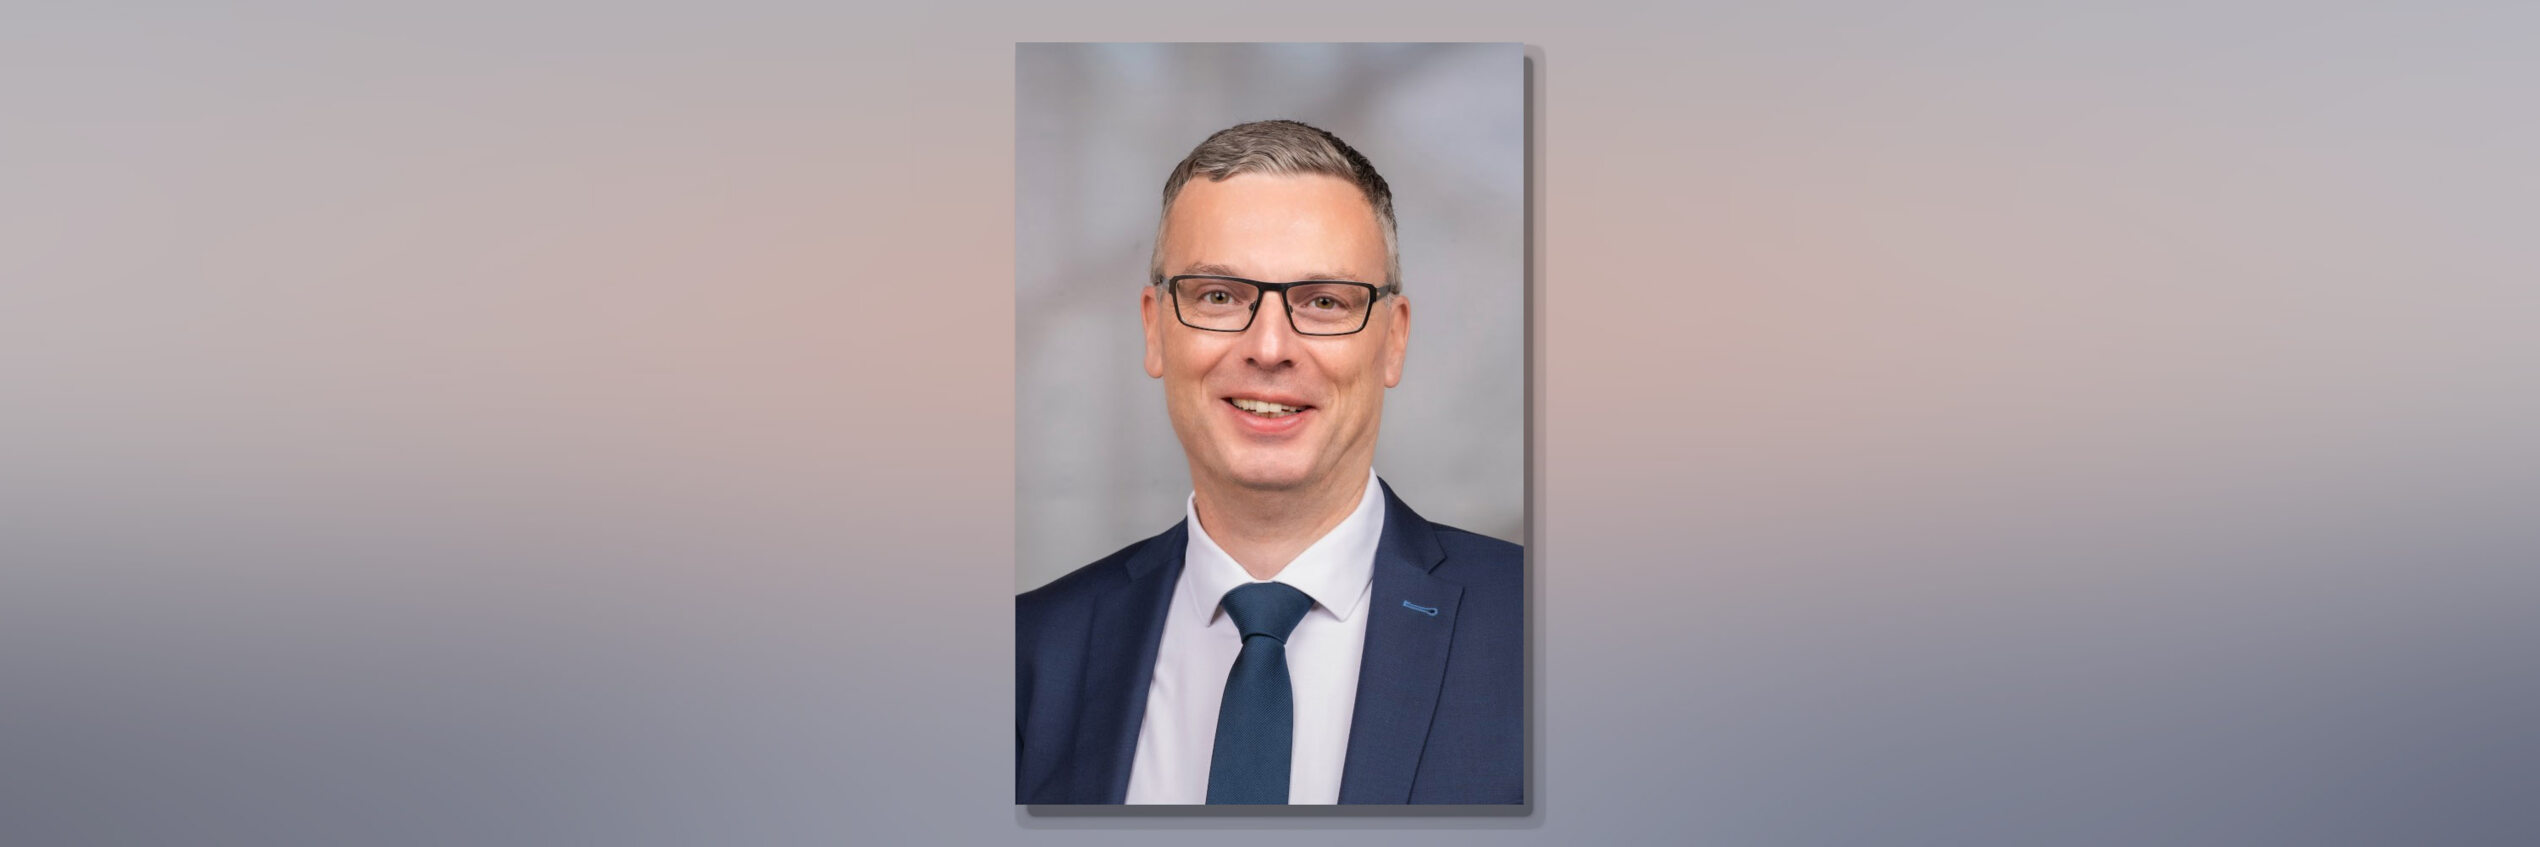 Dr. Nicolai Künzner new member of the Division Board